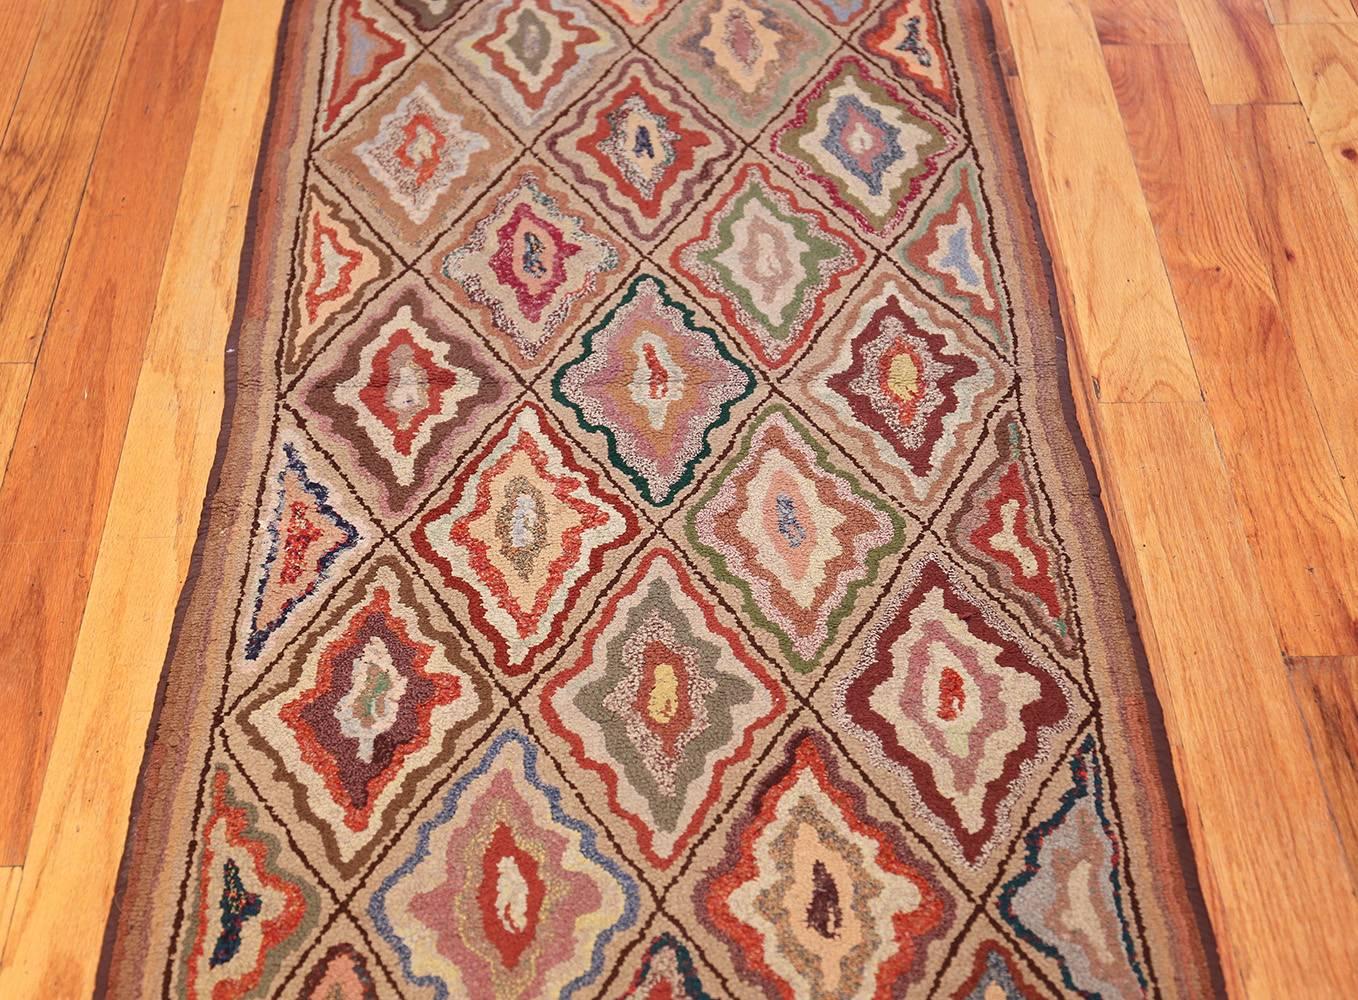 Hand-Knotted Antique American Hooked Rug. Size: 2 ft 2 in x 14 ft 1 in (0.66 m x 4.29 m)